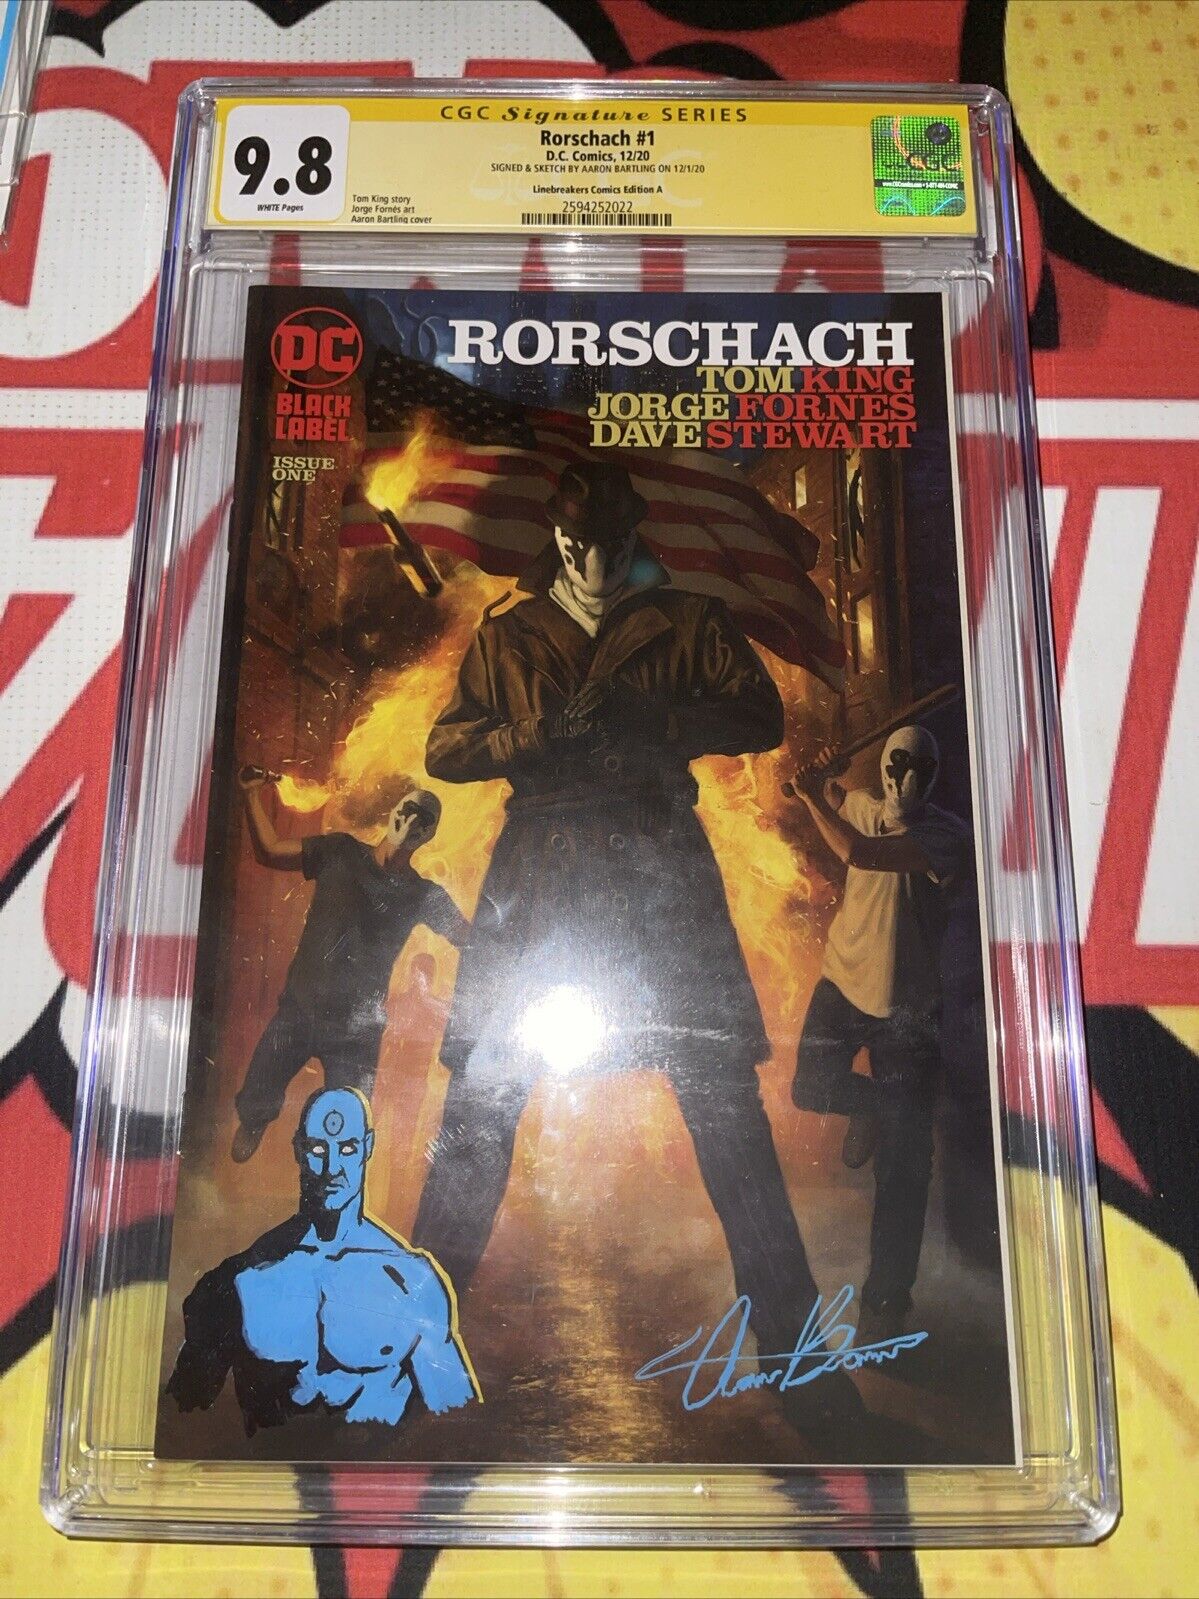 RORSCHACH #1 Aaron Bartling - CGC  9.8 - Sign And Sketch By Aaron Bartling